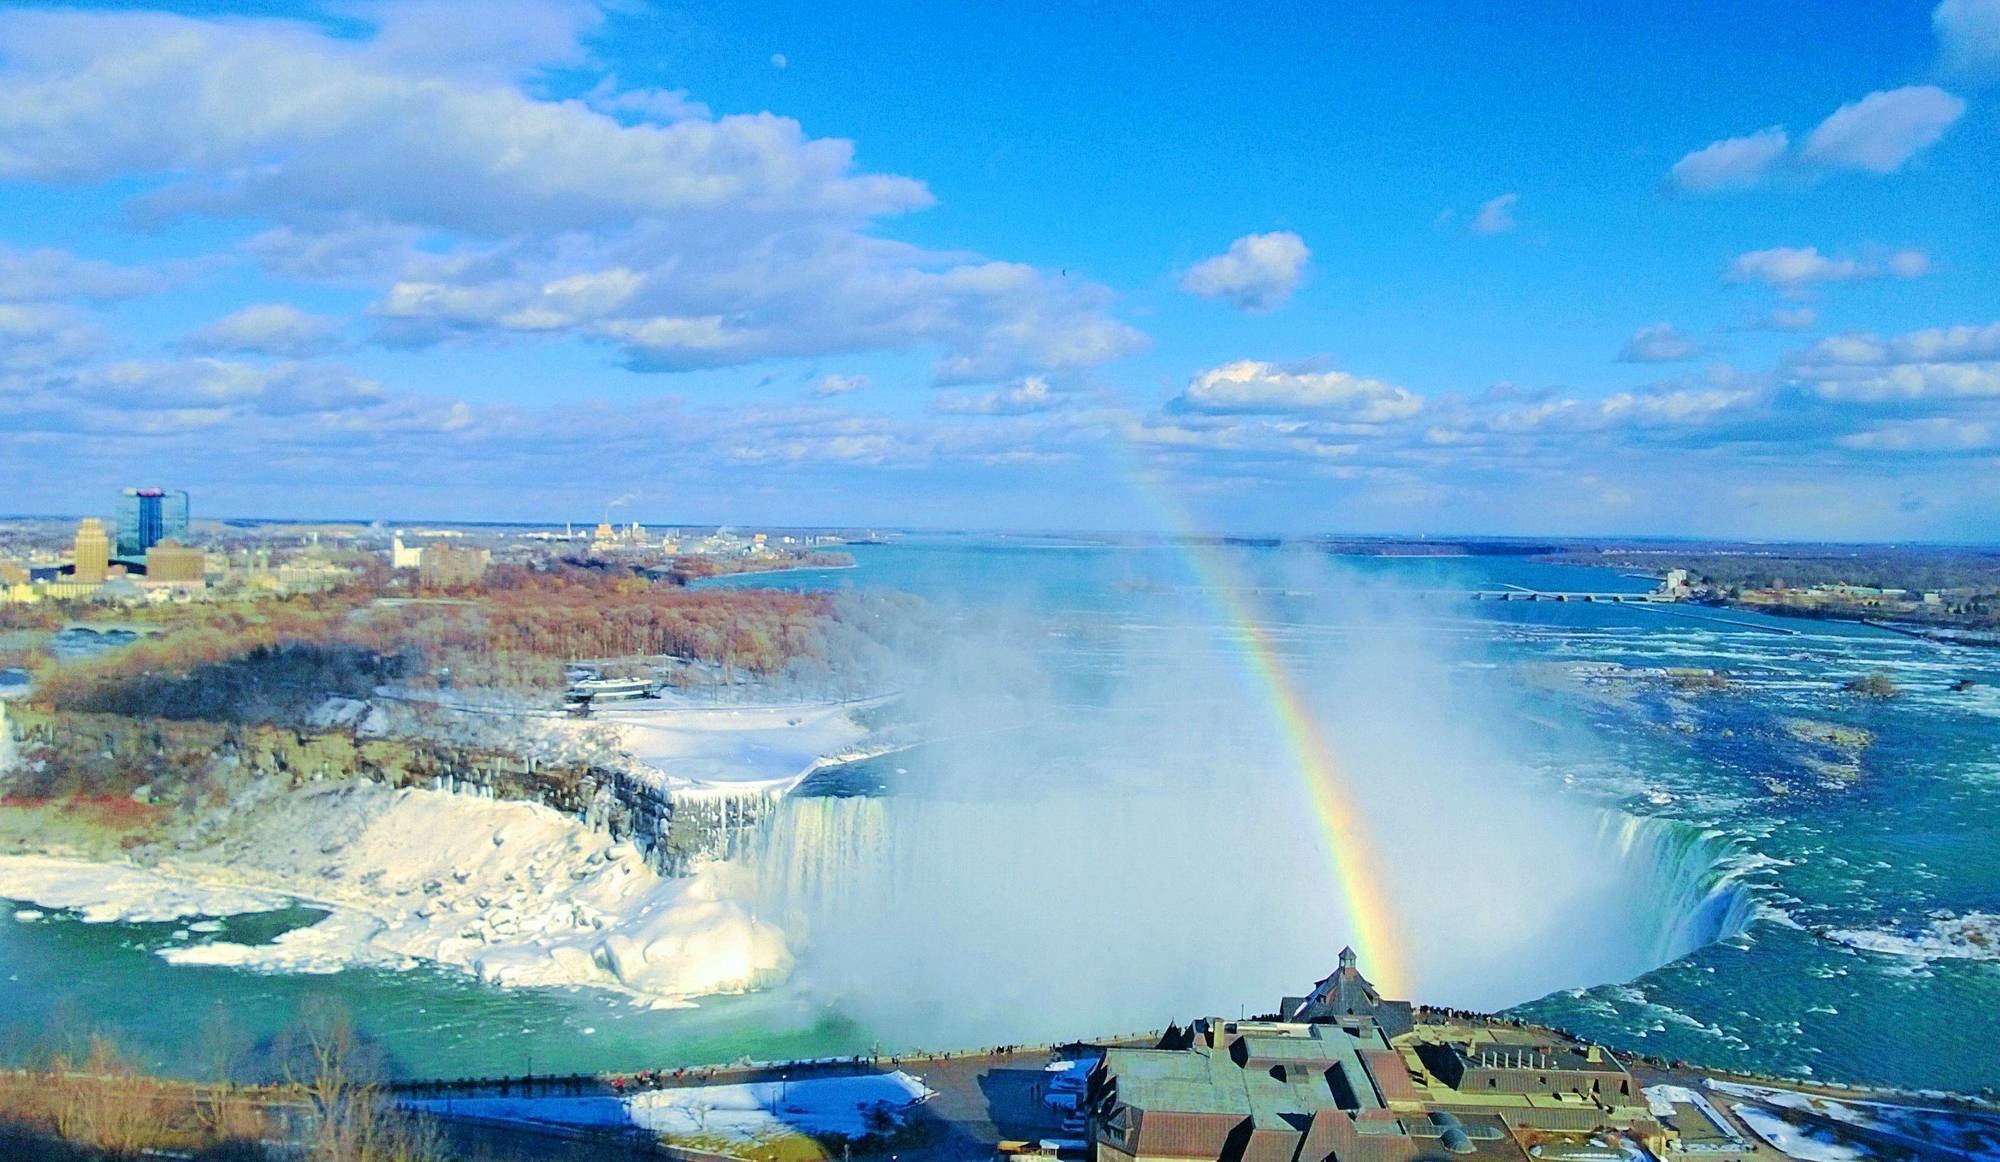 Another excellent view of Niagara Falls.